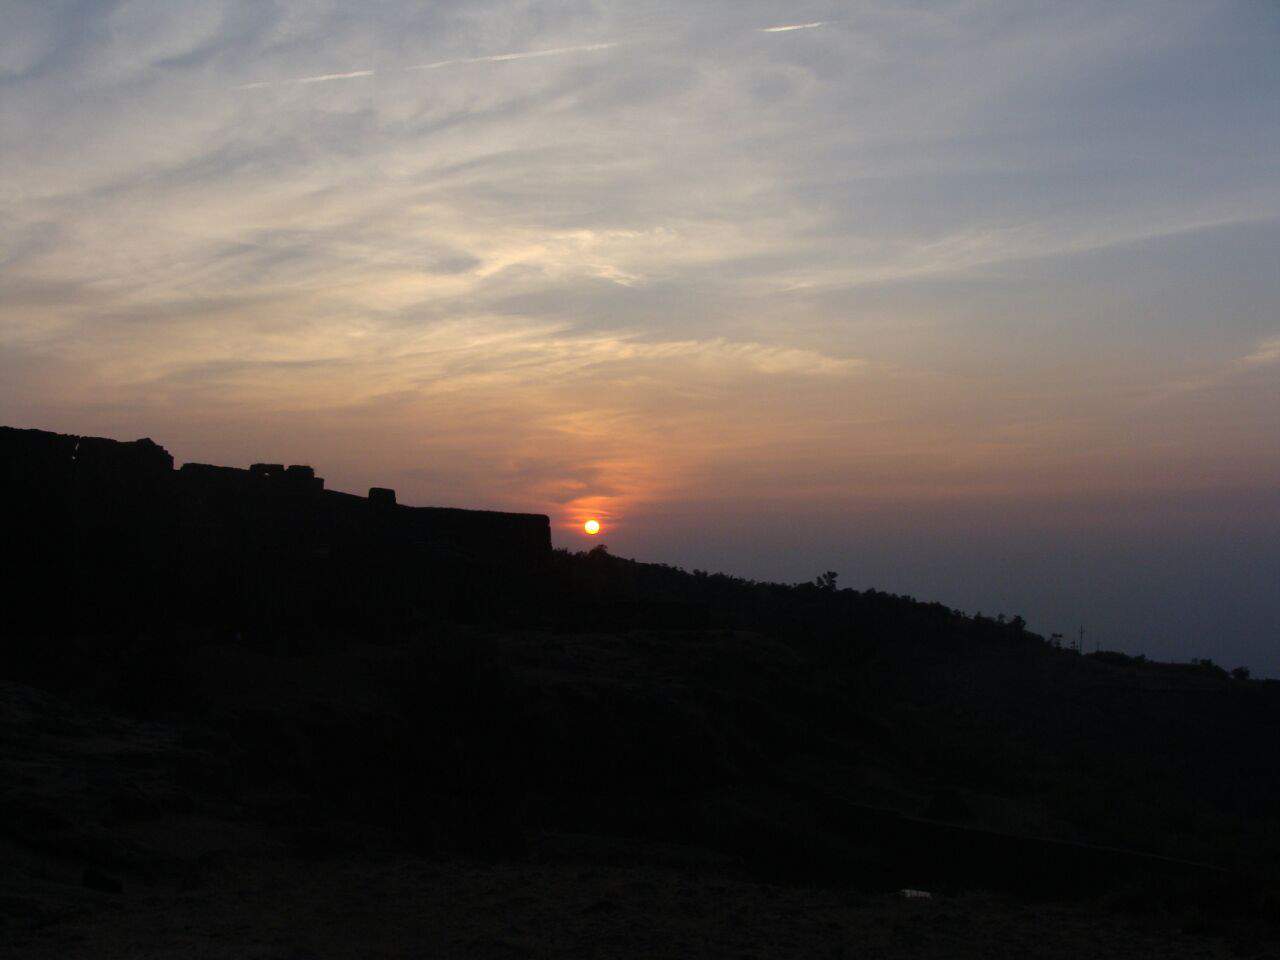 A sunset at Raigad in Konkan